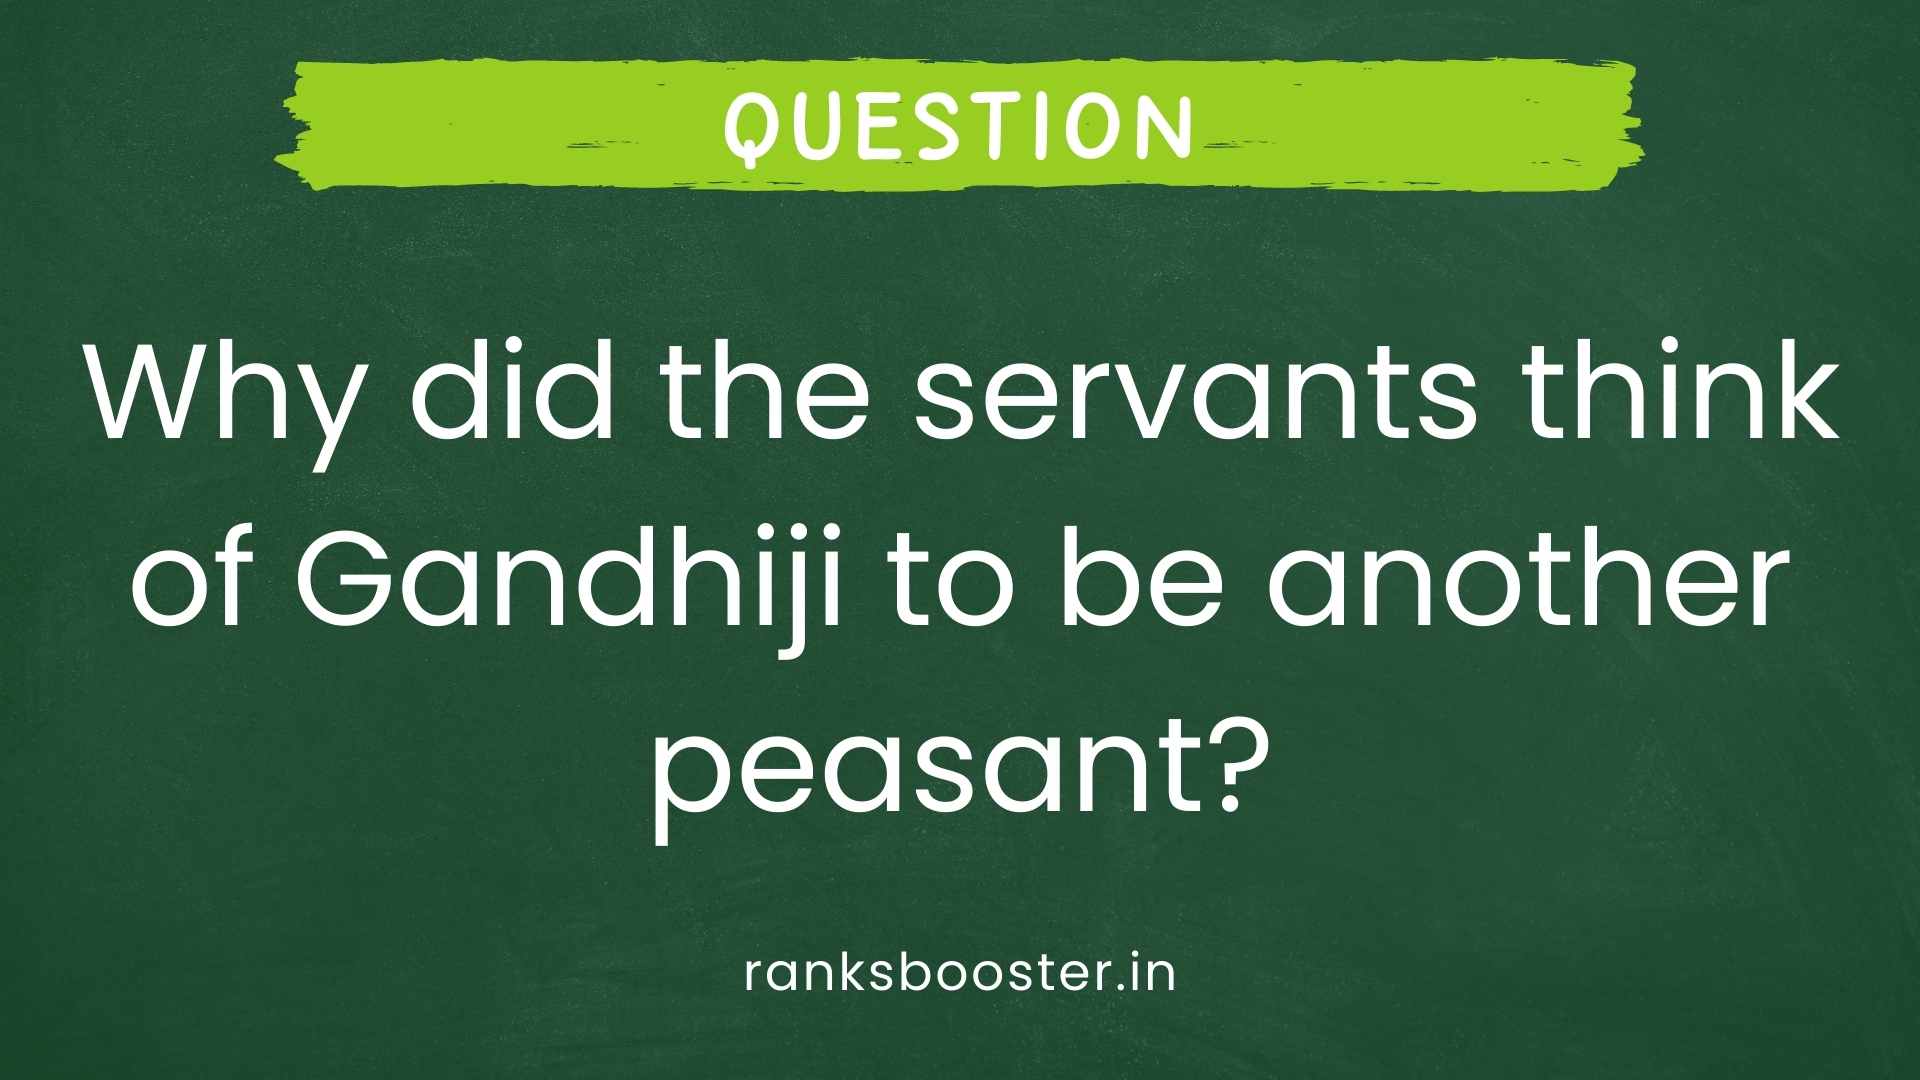 Question: Why did the servants think of Gandhiji to be another peasant? [CBSE Delhi 2010]